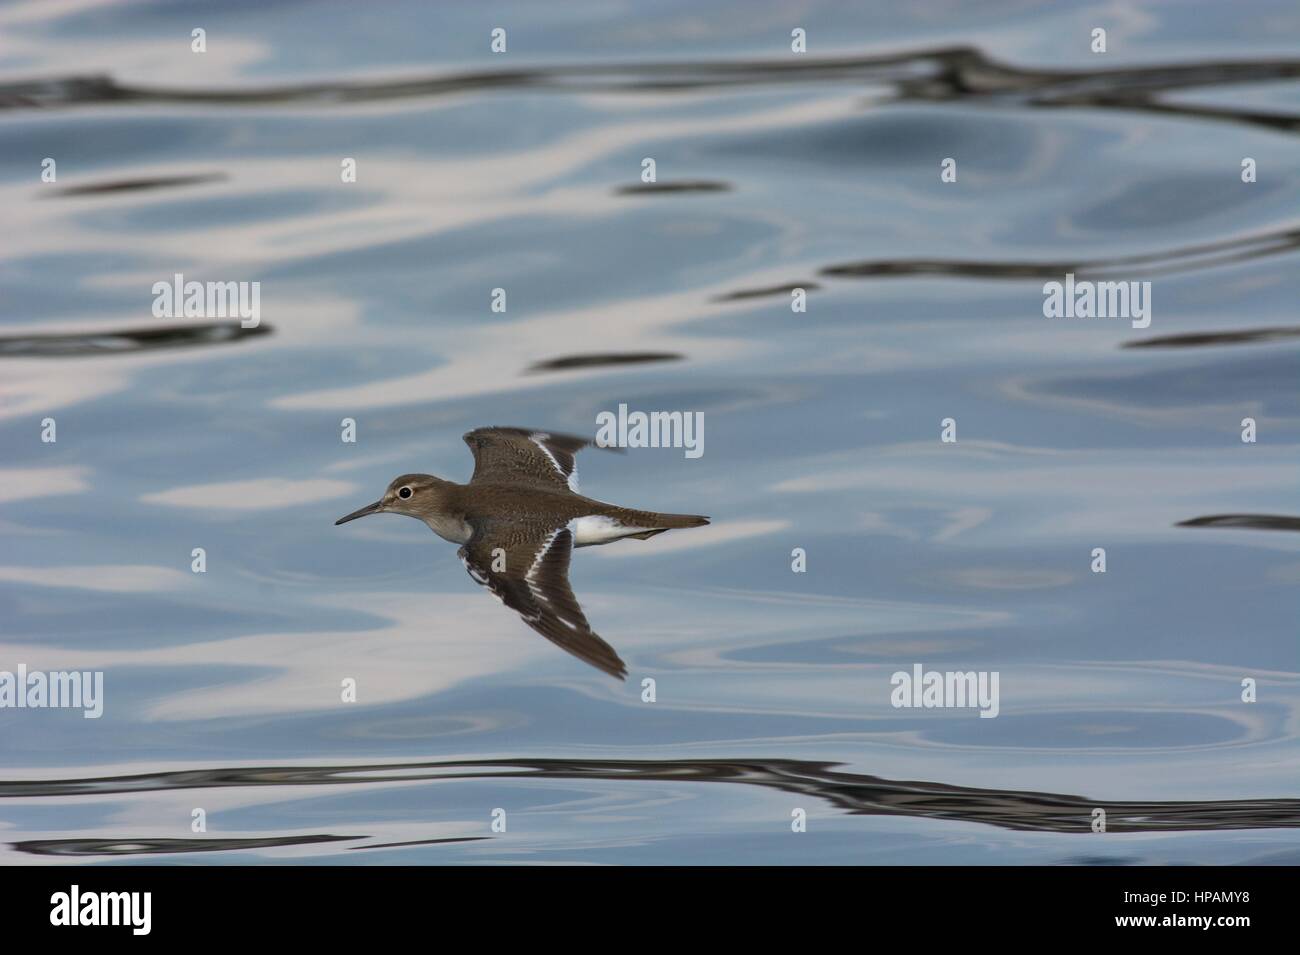 Upperside view of a common sandpiper - Actitis hypoleucos - with out-stretched wings flying low over water.  Abstract background ripples. Stock Photo